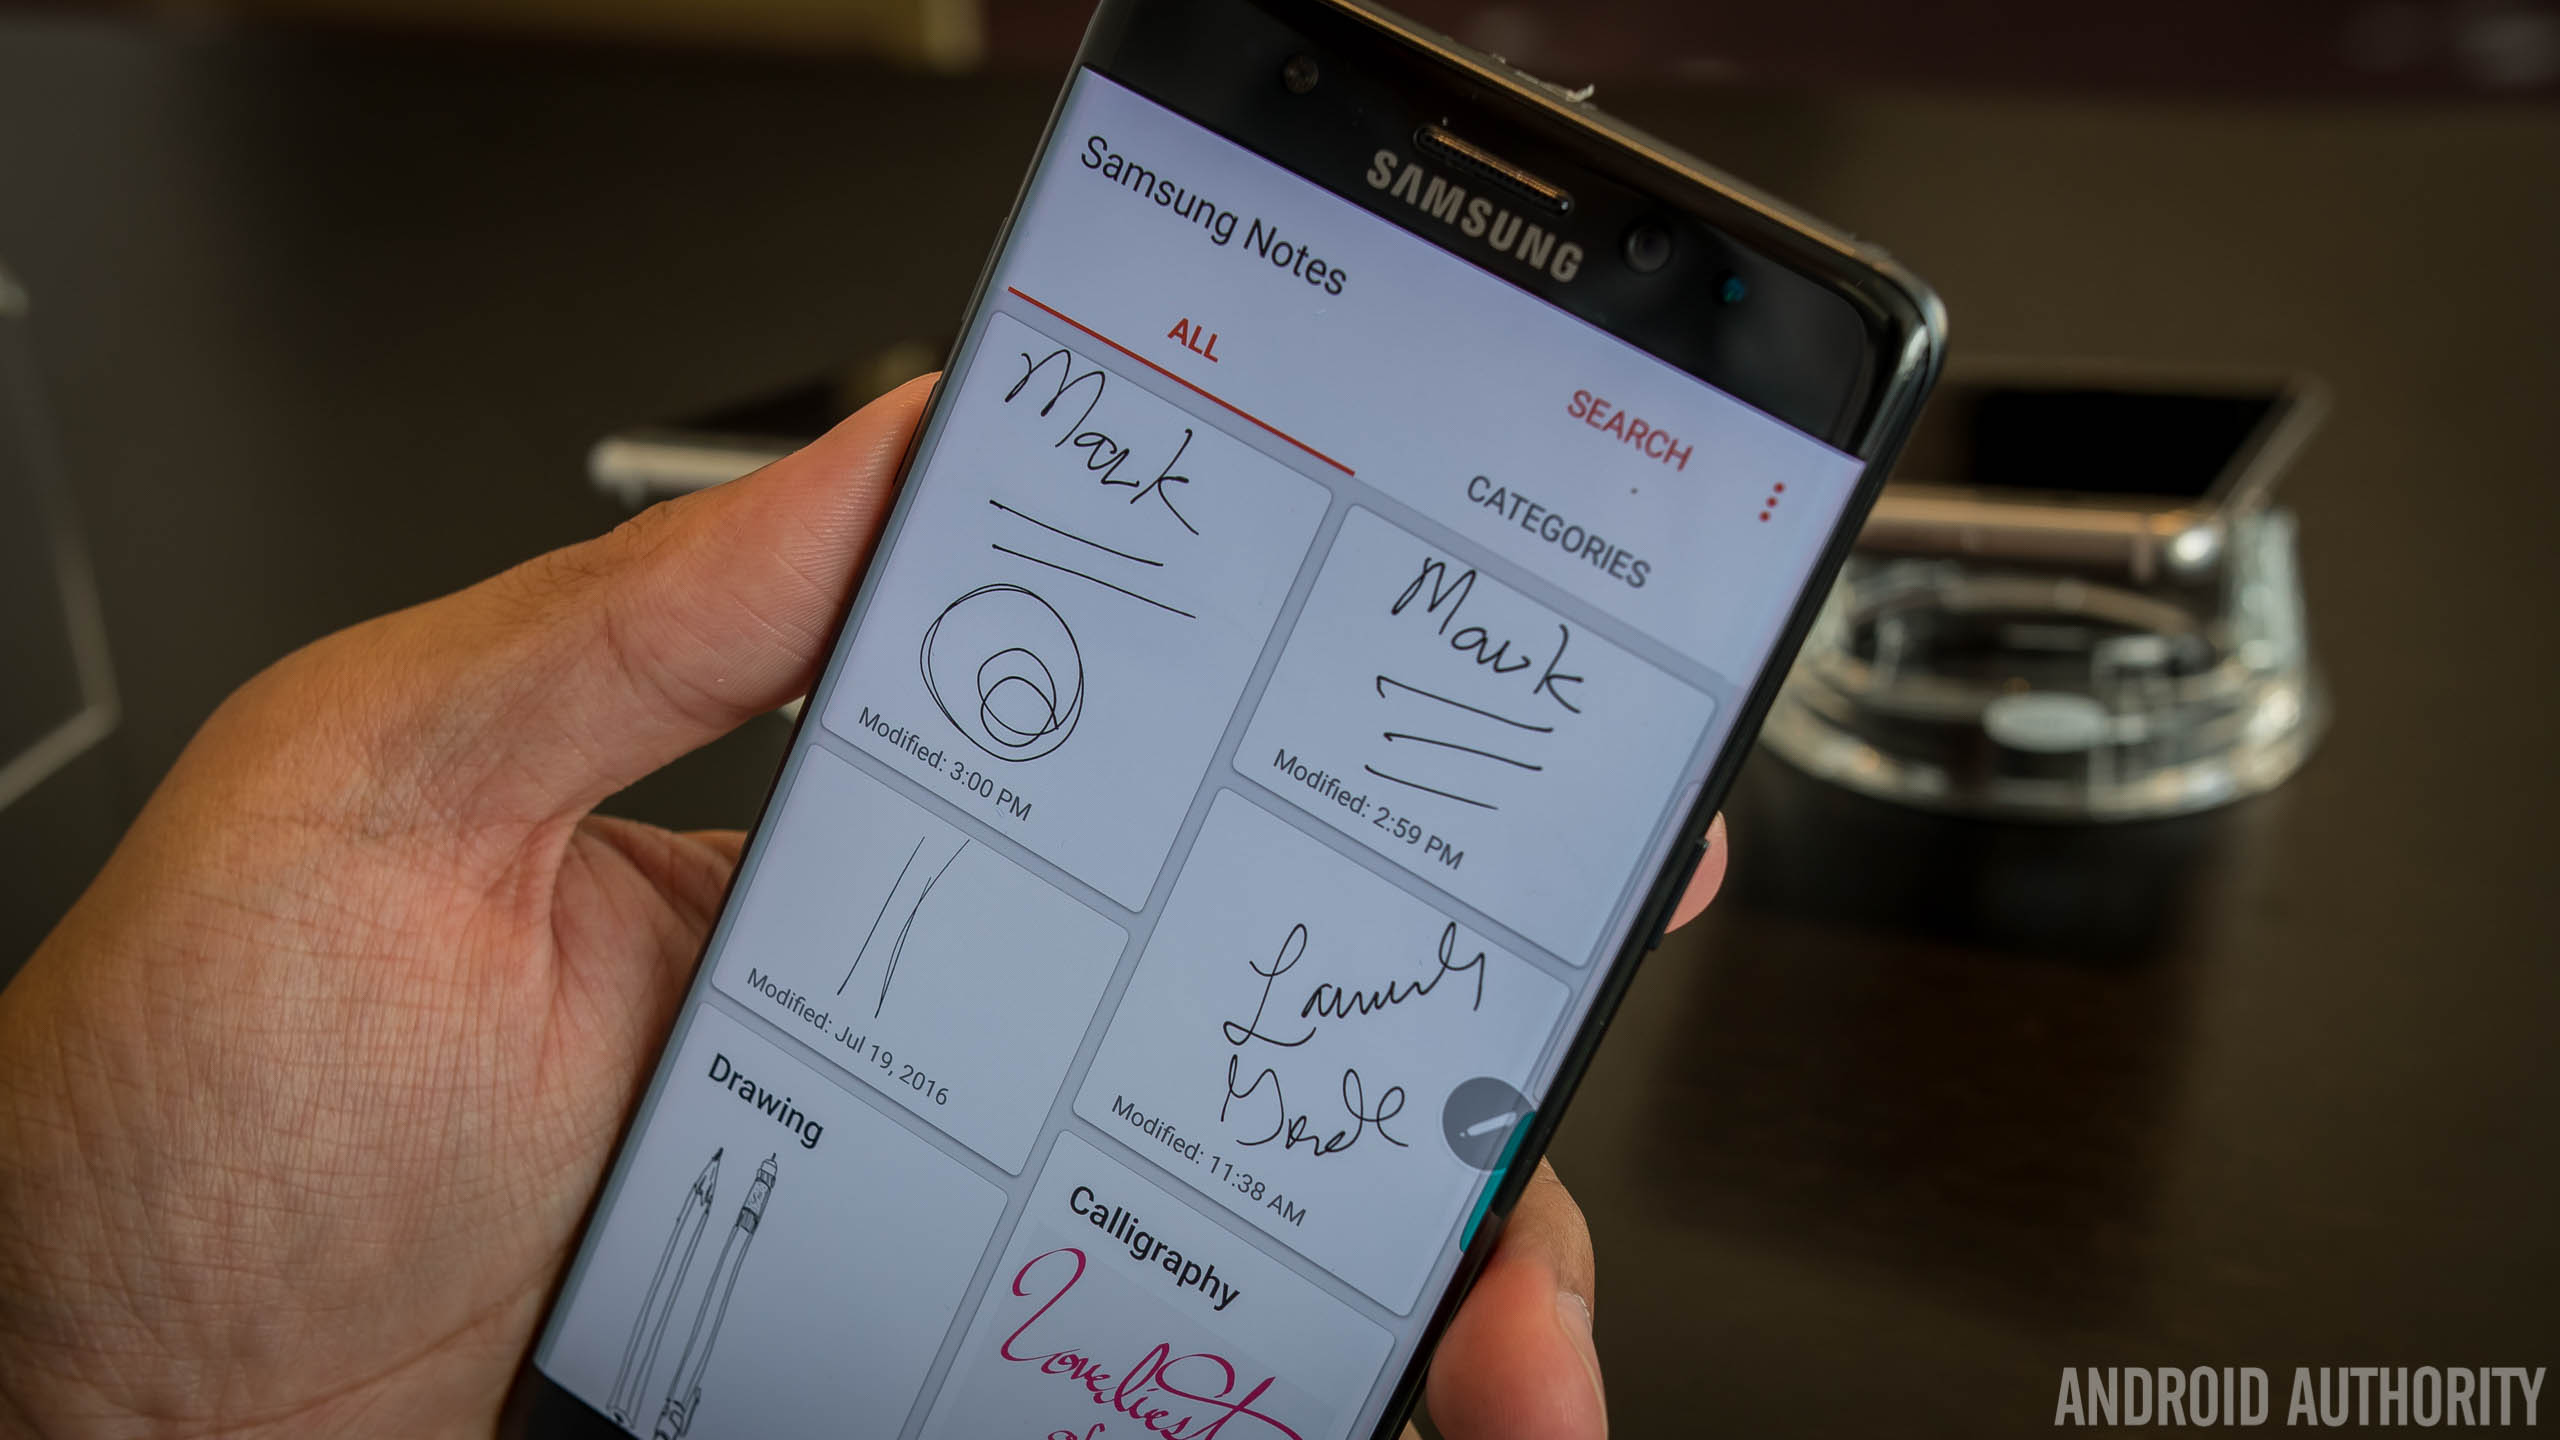 Samsung-Galaxy-Note-7-hands-on-first-batch-AA-(45-of-47)